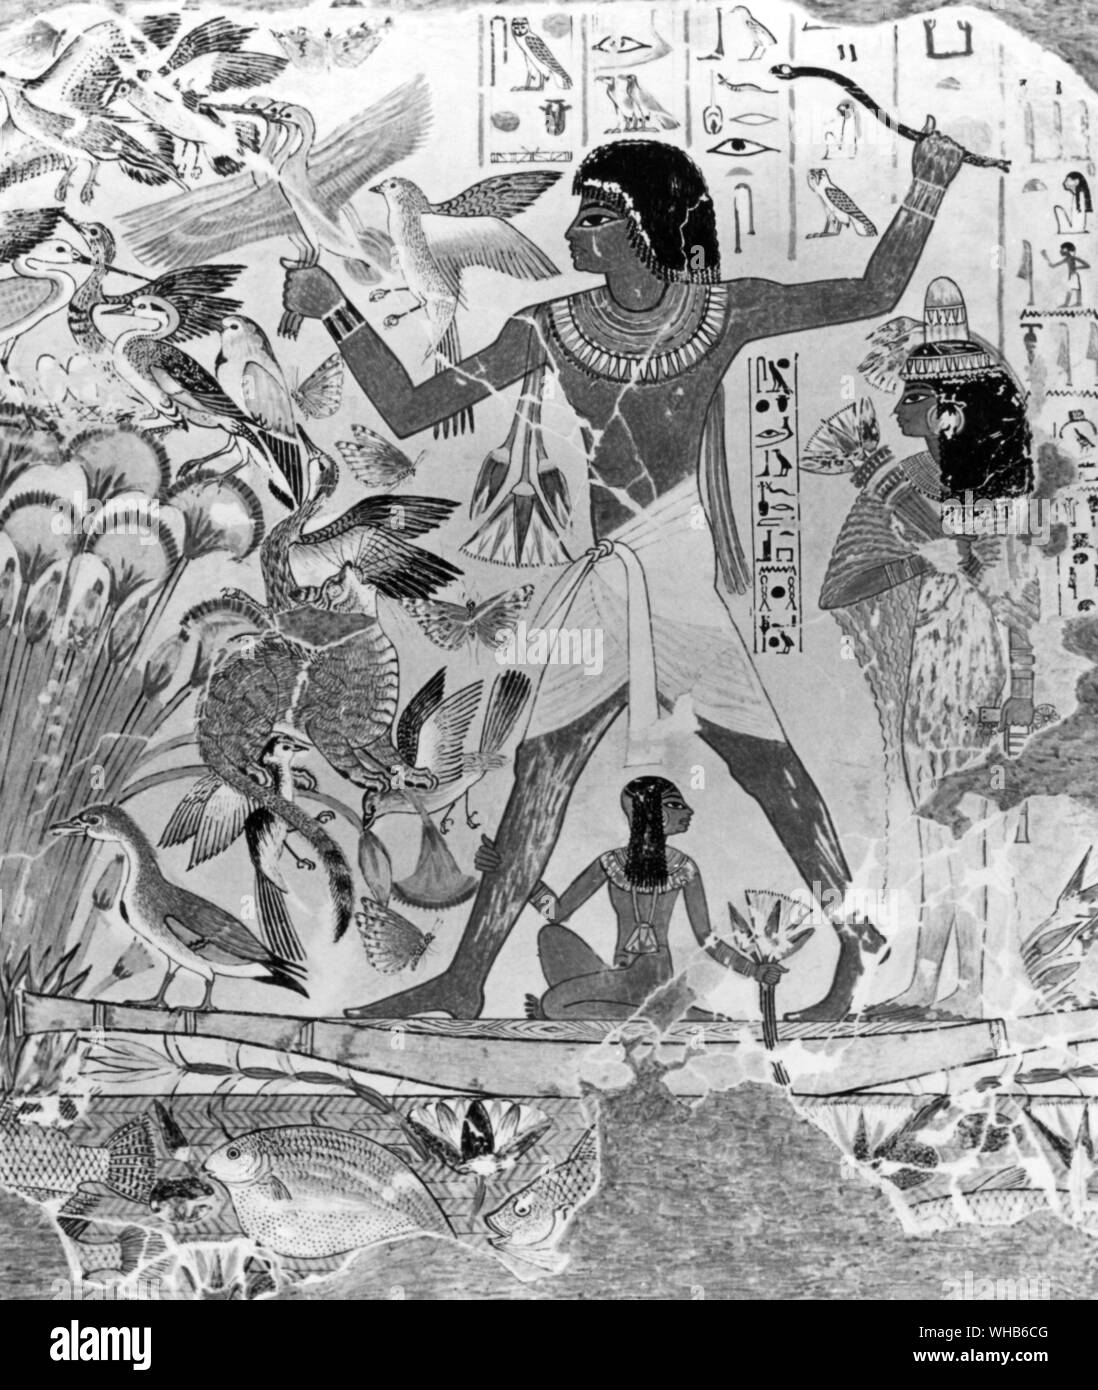 Fowling in papyrus marshes. Scene from tomb of Nebamun, Scribe of XVIII Dynasty.. Stock Photo